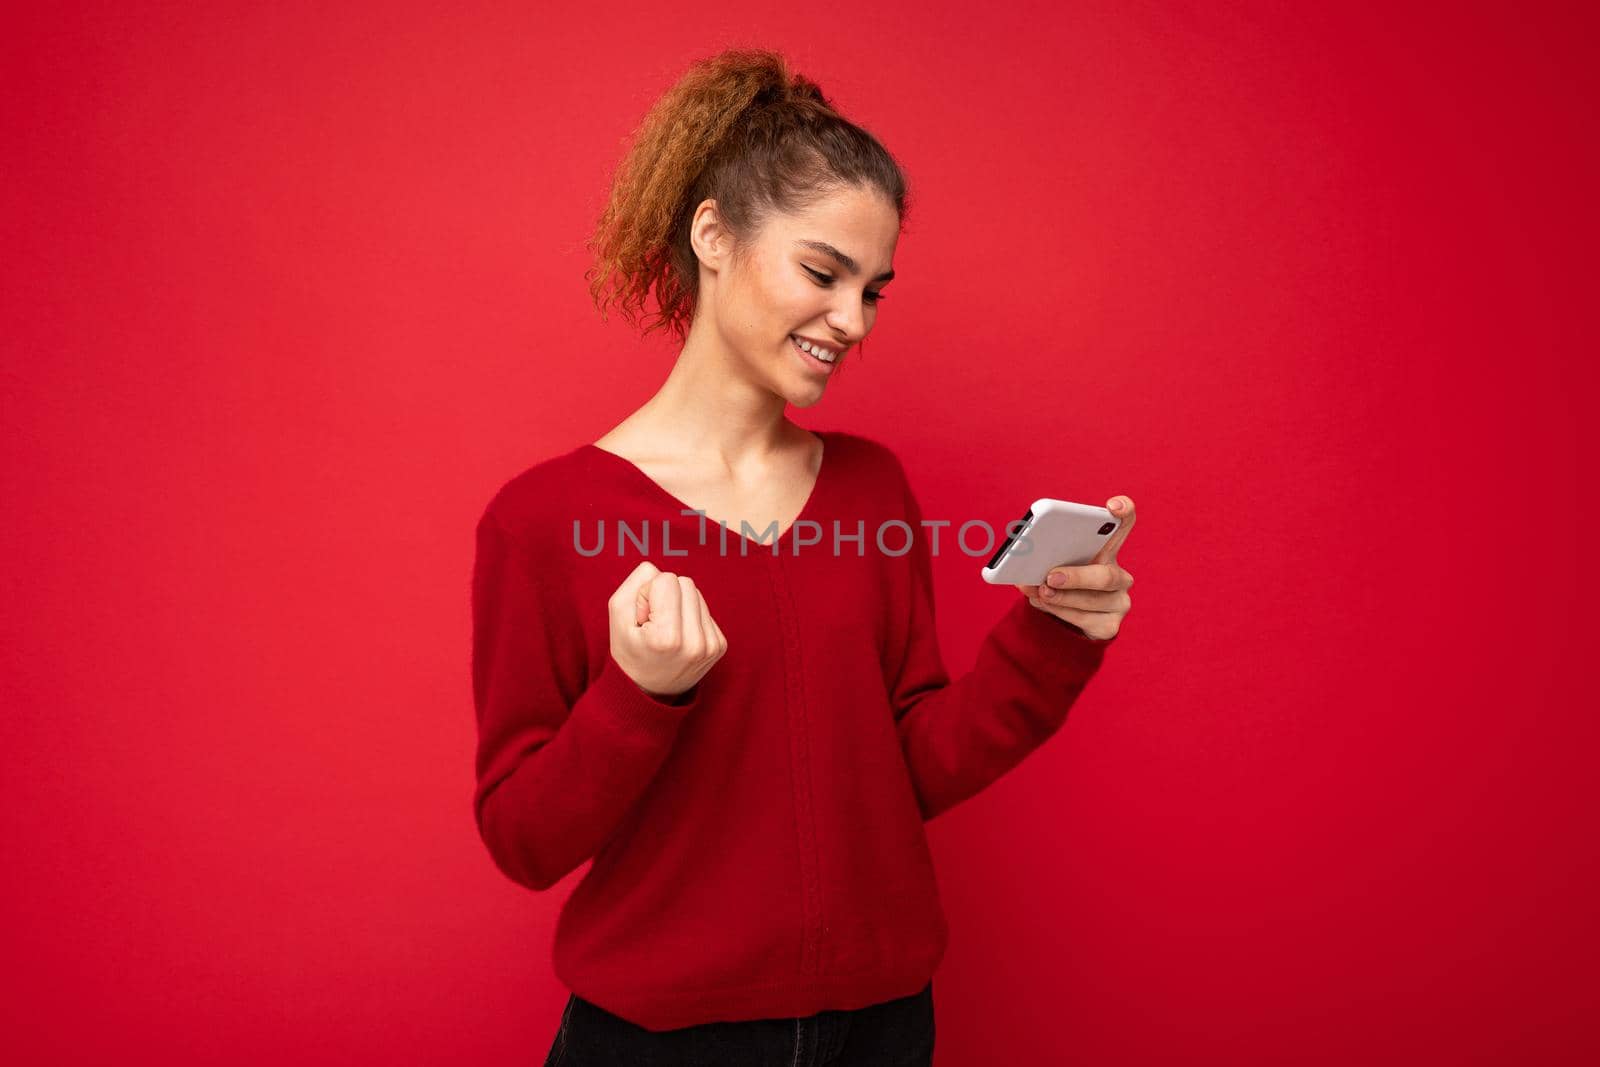 Cheerful young woman standing isolated over red background, holding mobile phone, celebrating by TRMK